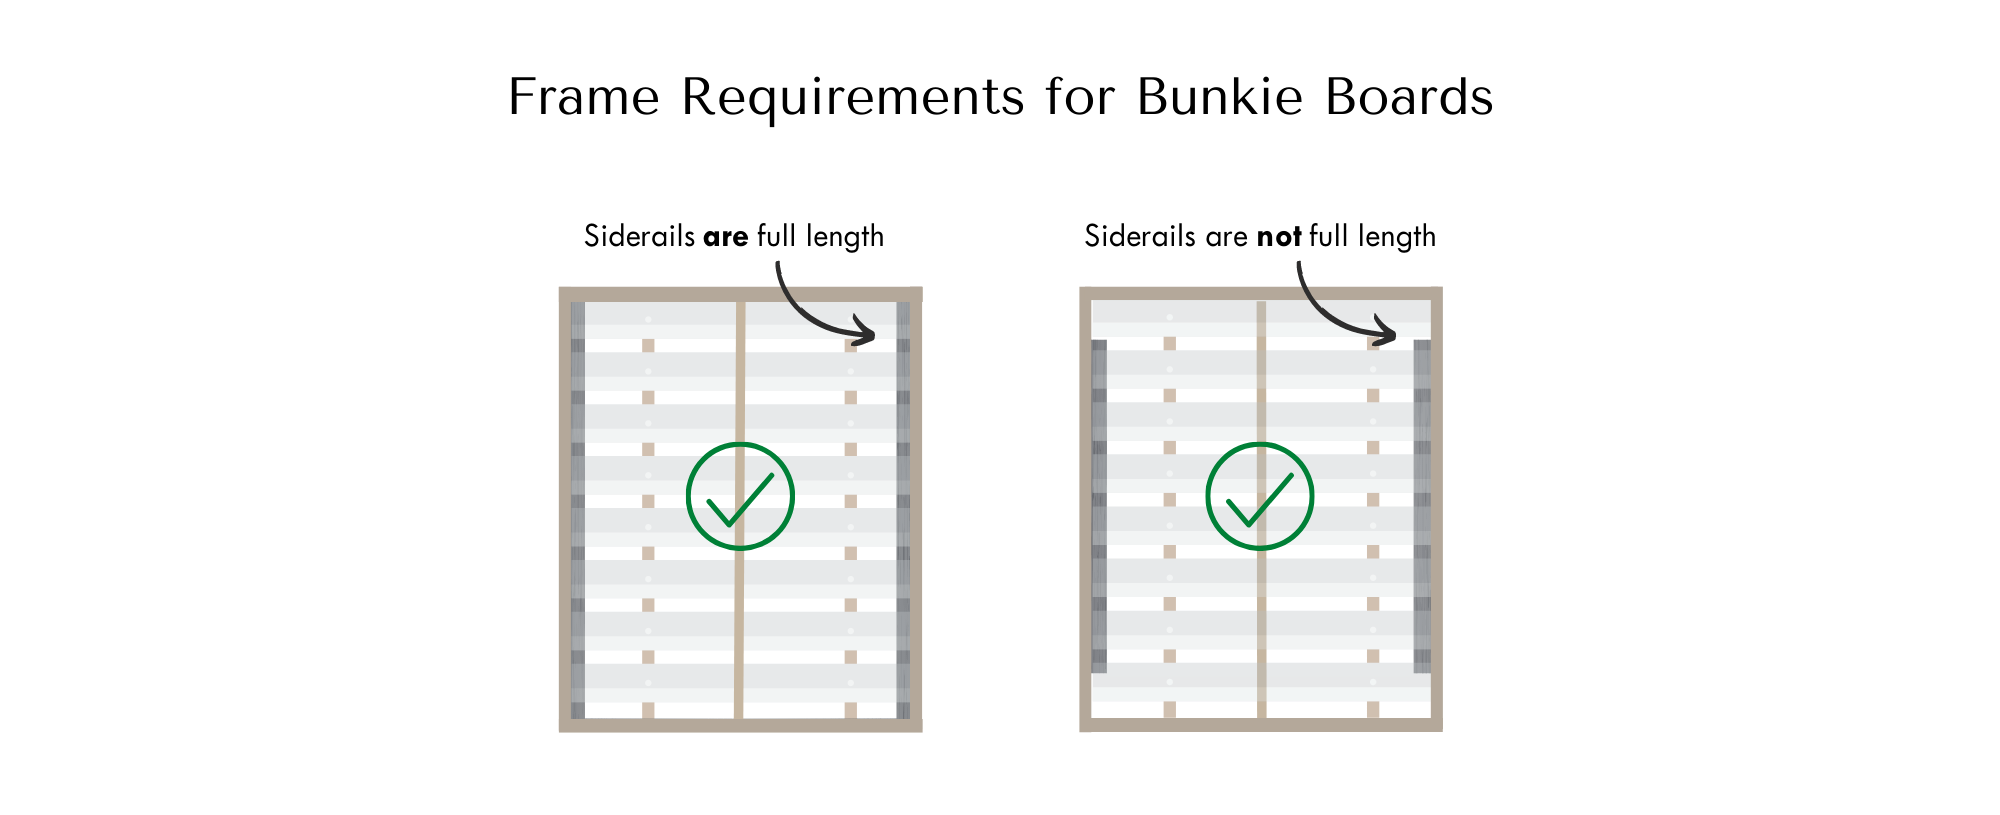 Graphic comparing frame requirements for bed frame slats